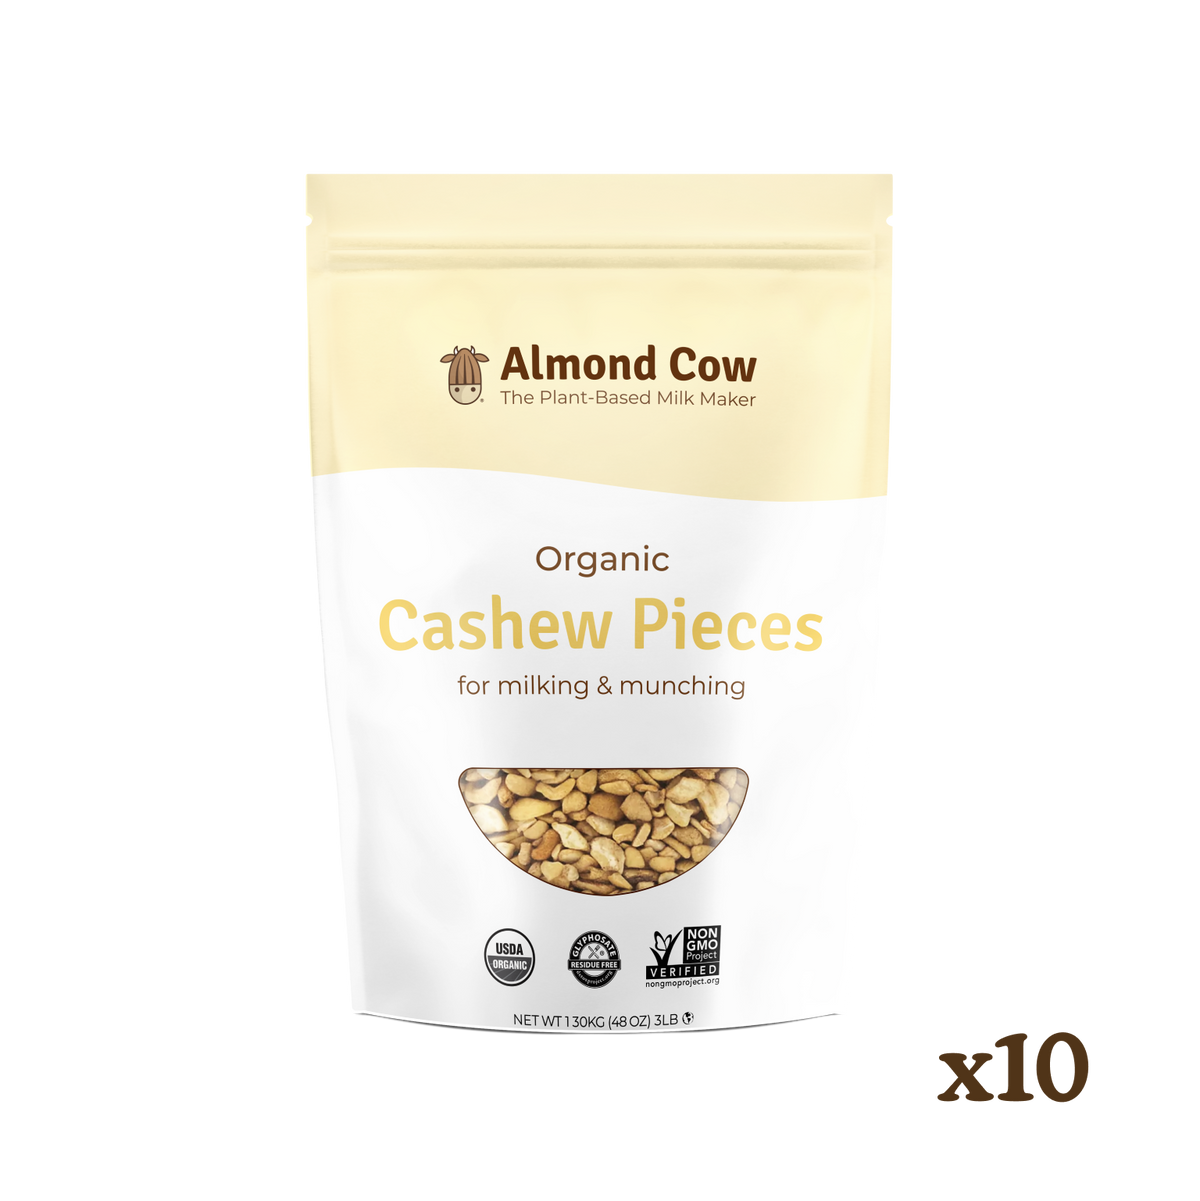 Case of Organic Cashew Pieces - 30 lbs